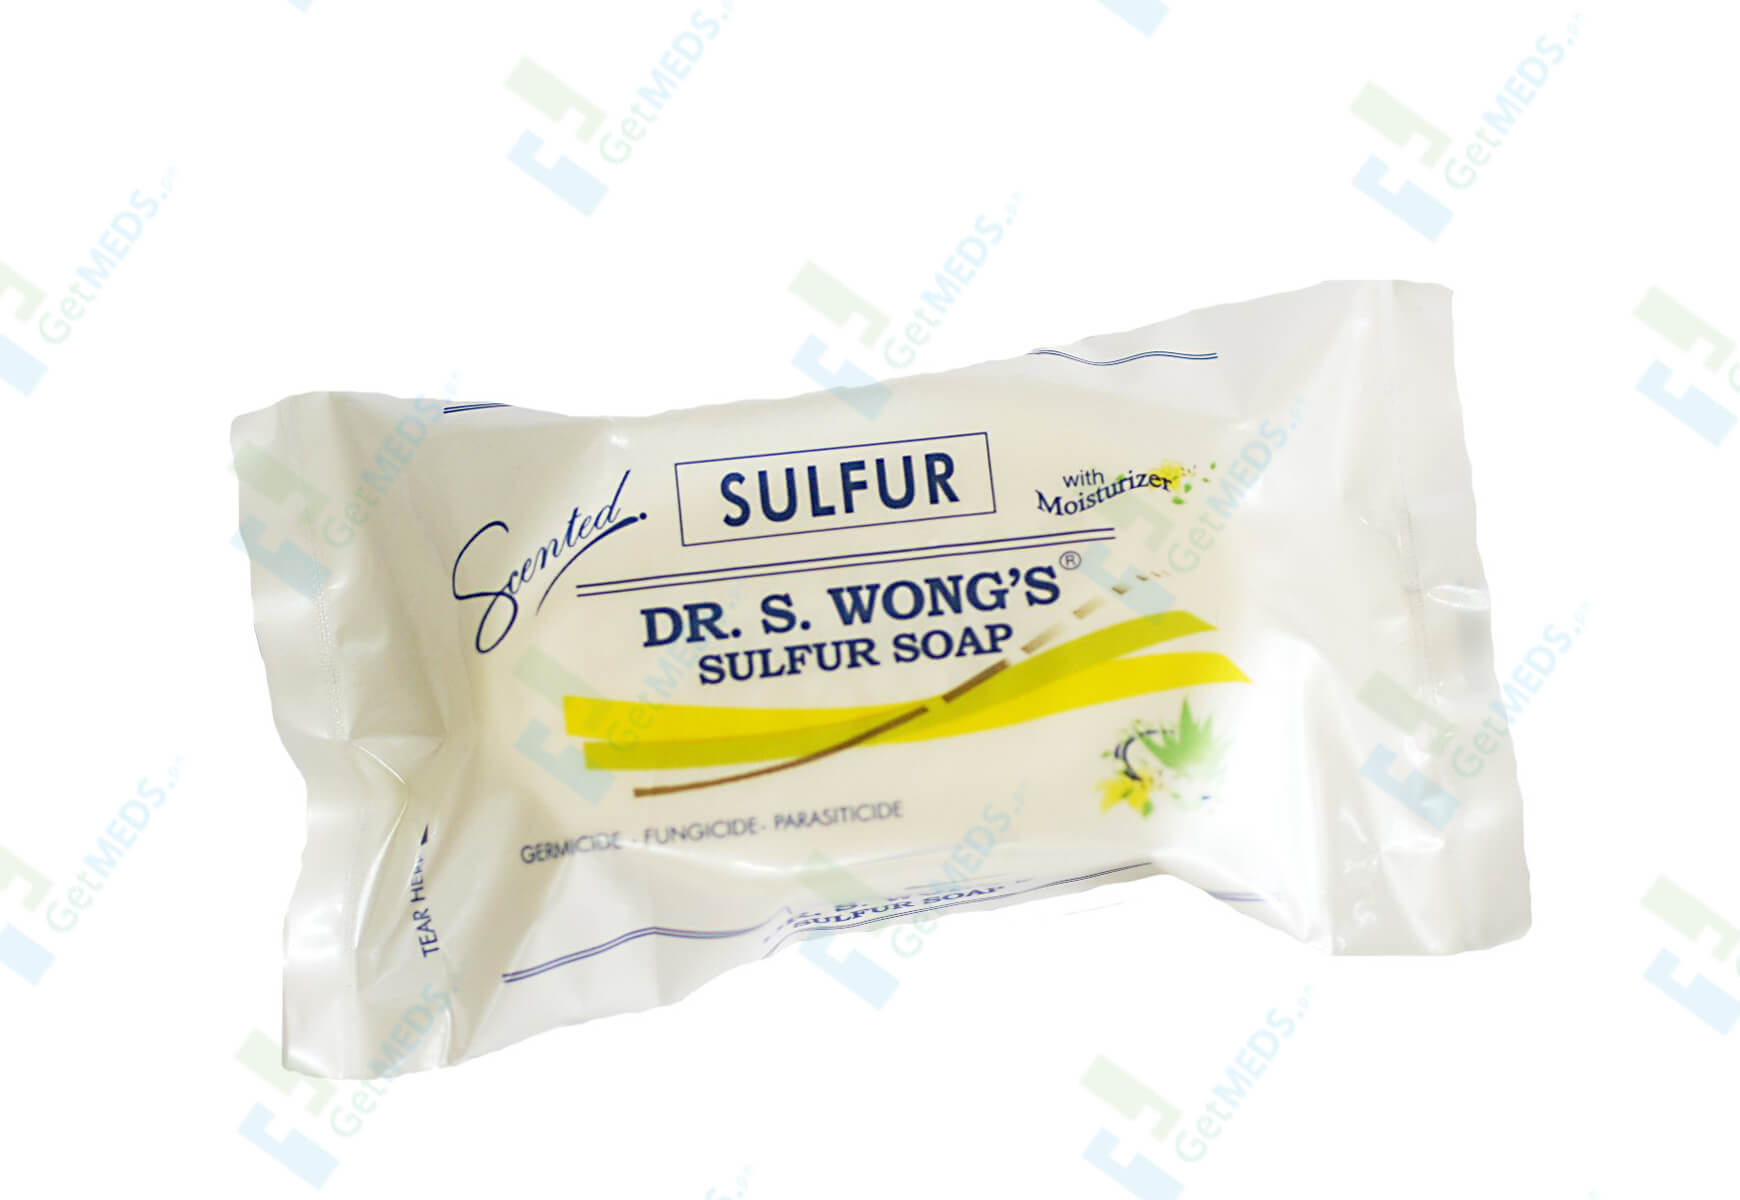 Dr. S. Wong's Sulfur Soap with Moisturizer